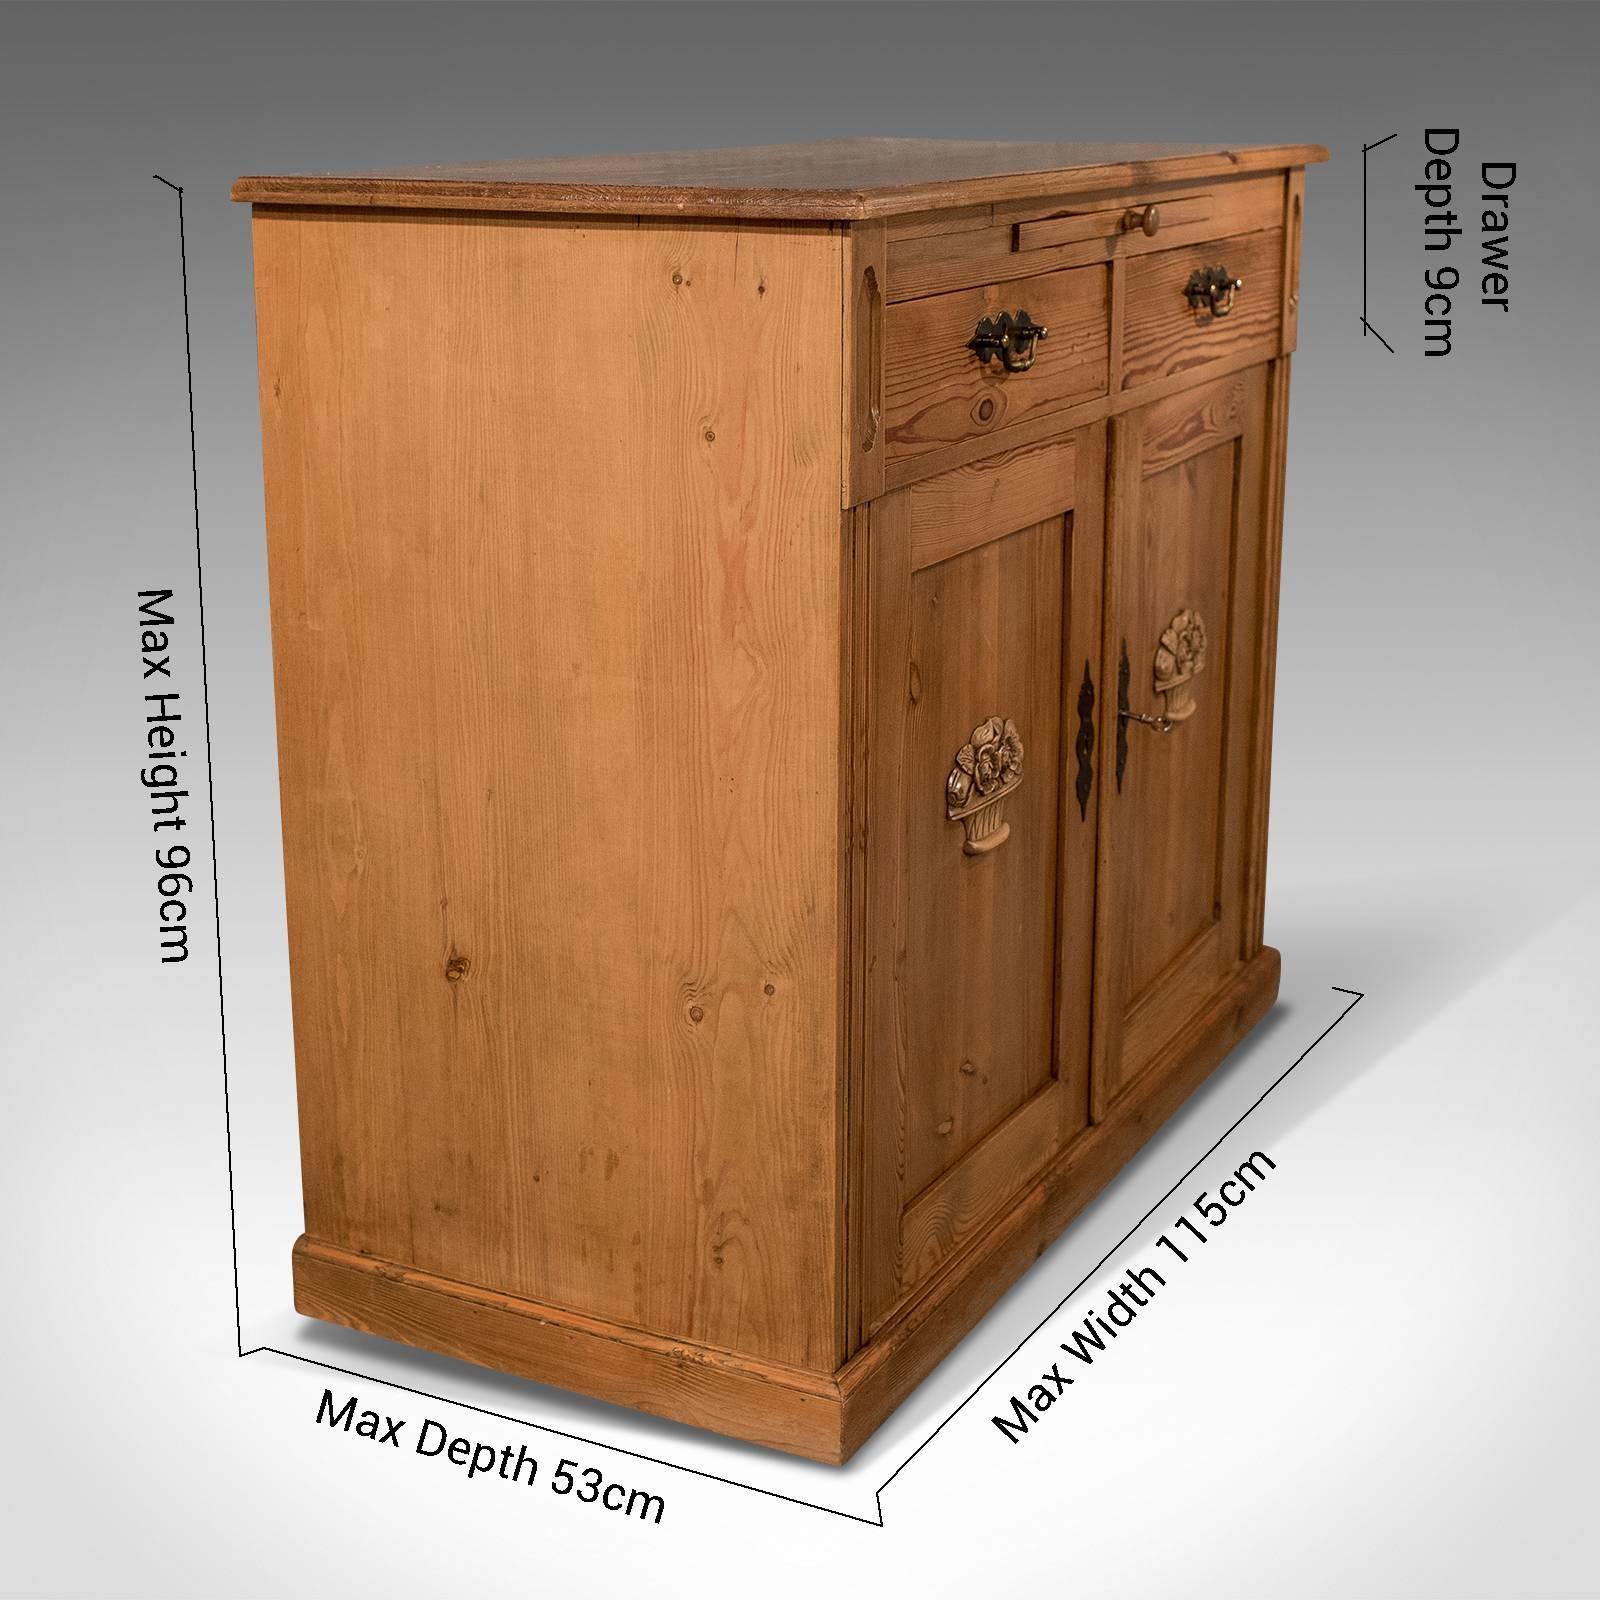 A most pleasing cabinet presented in very good antique condition
Classically crafted in pine offering a fine combination of practicality and style
Providing a traditional lower cupboard area below a pair of drawers - with the added benefit of an